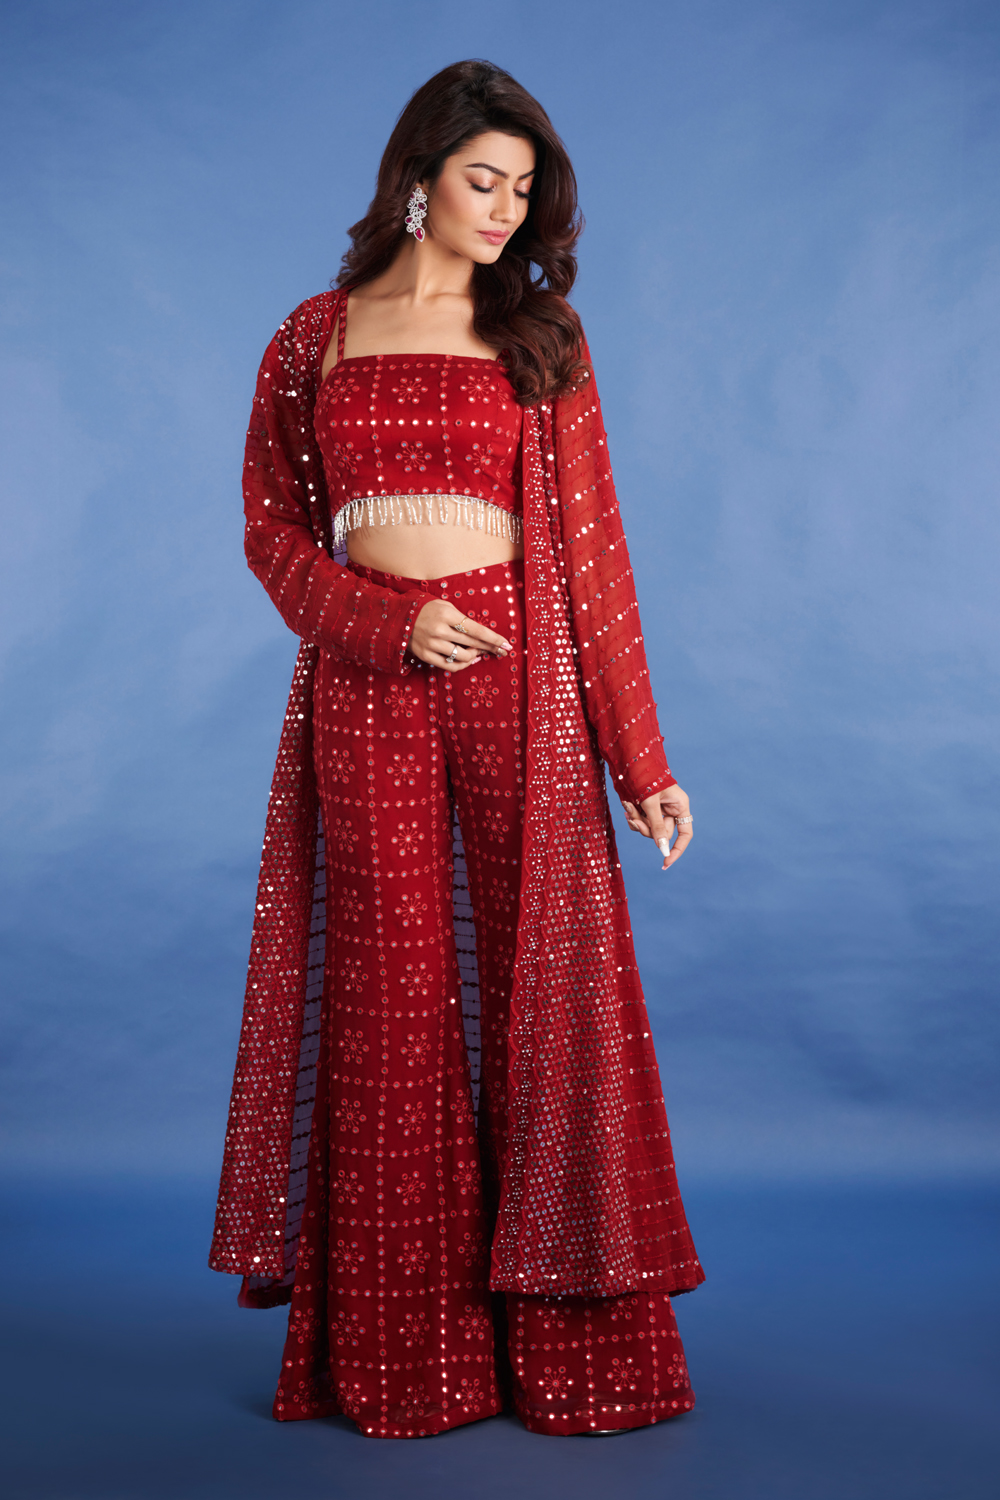 Aggregate 80+ palazzo pants western dresses - in.eteachers